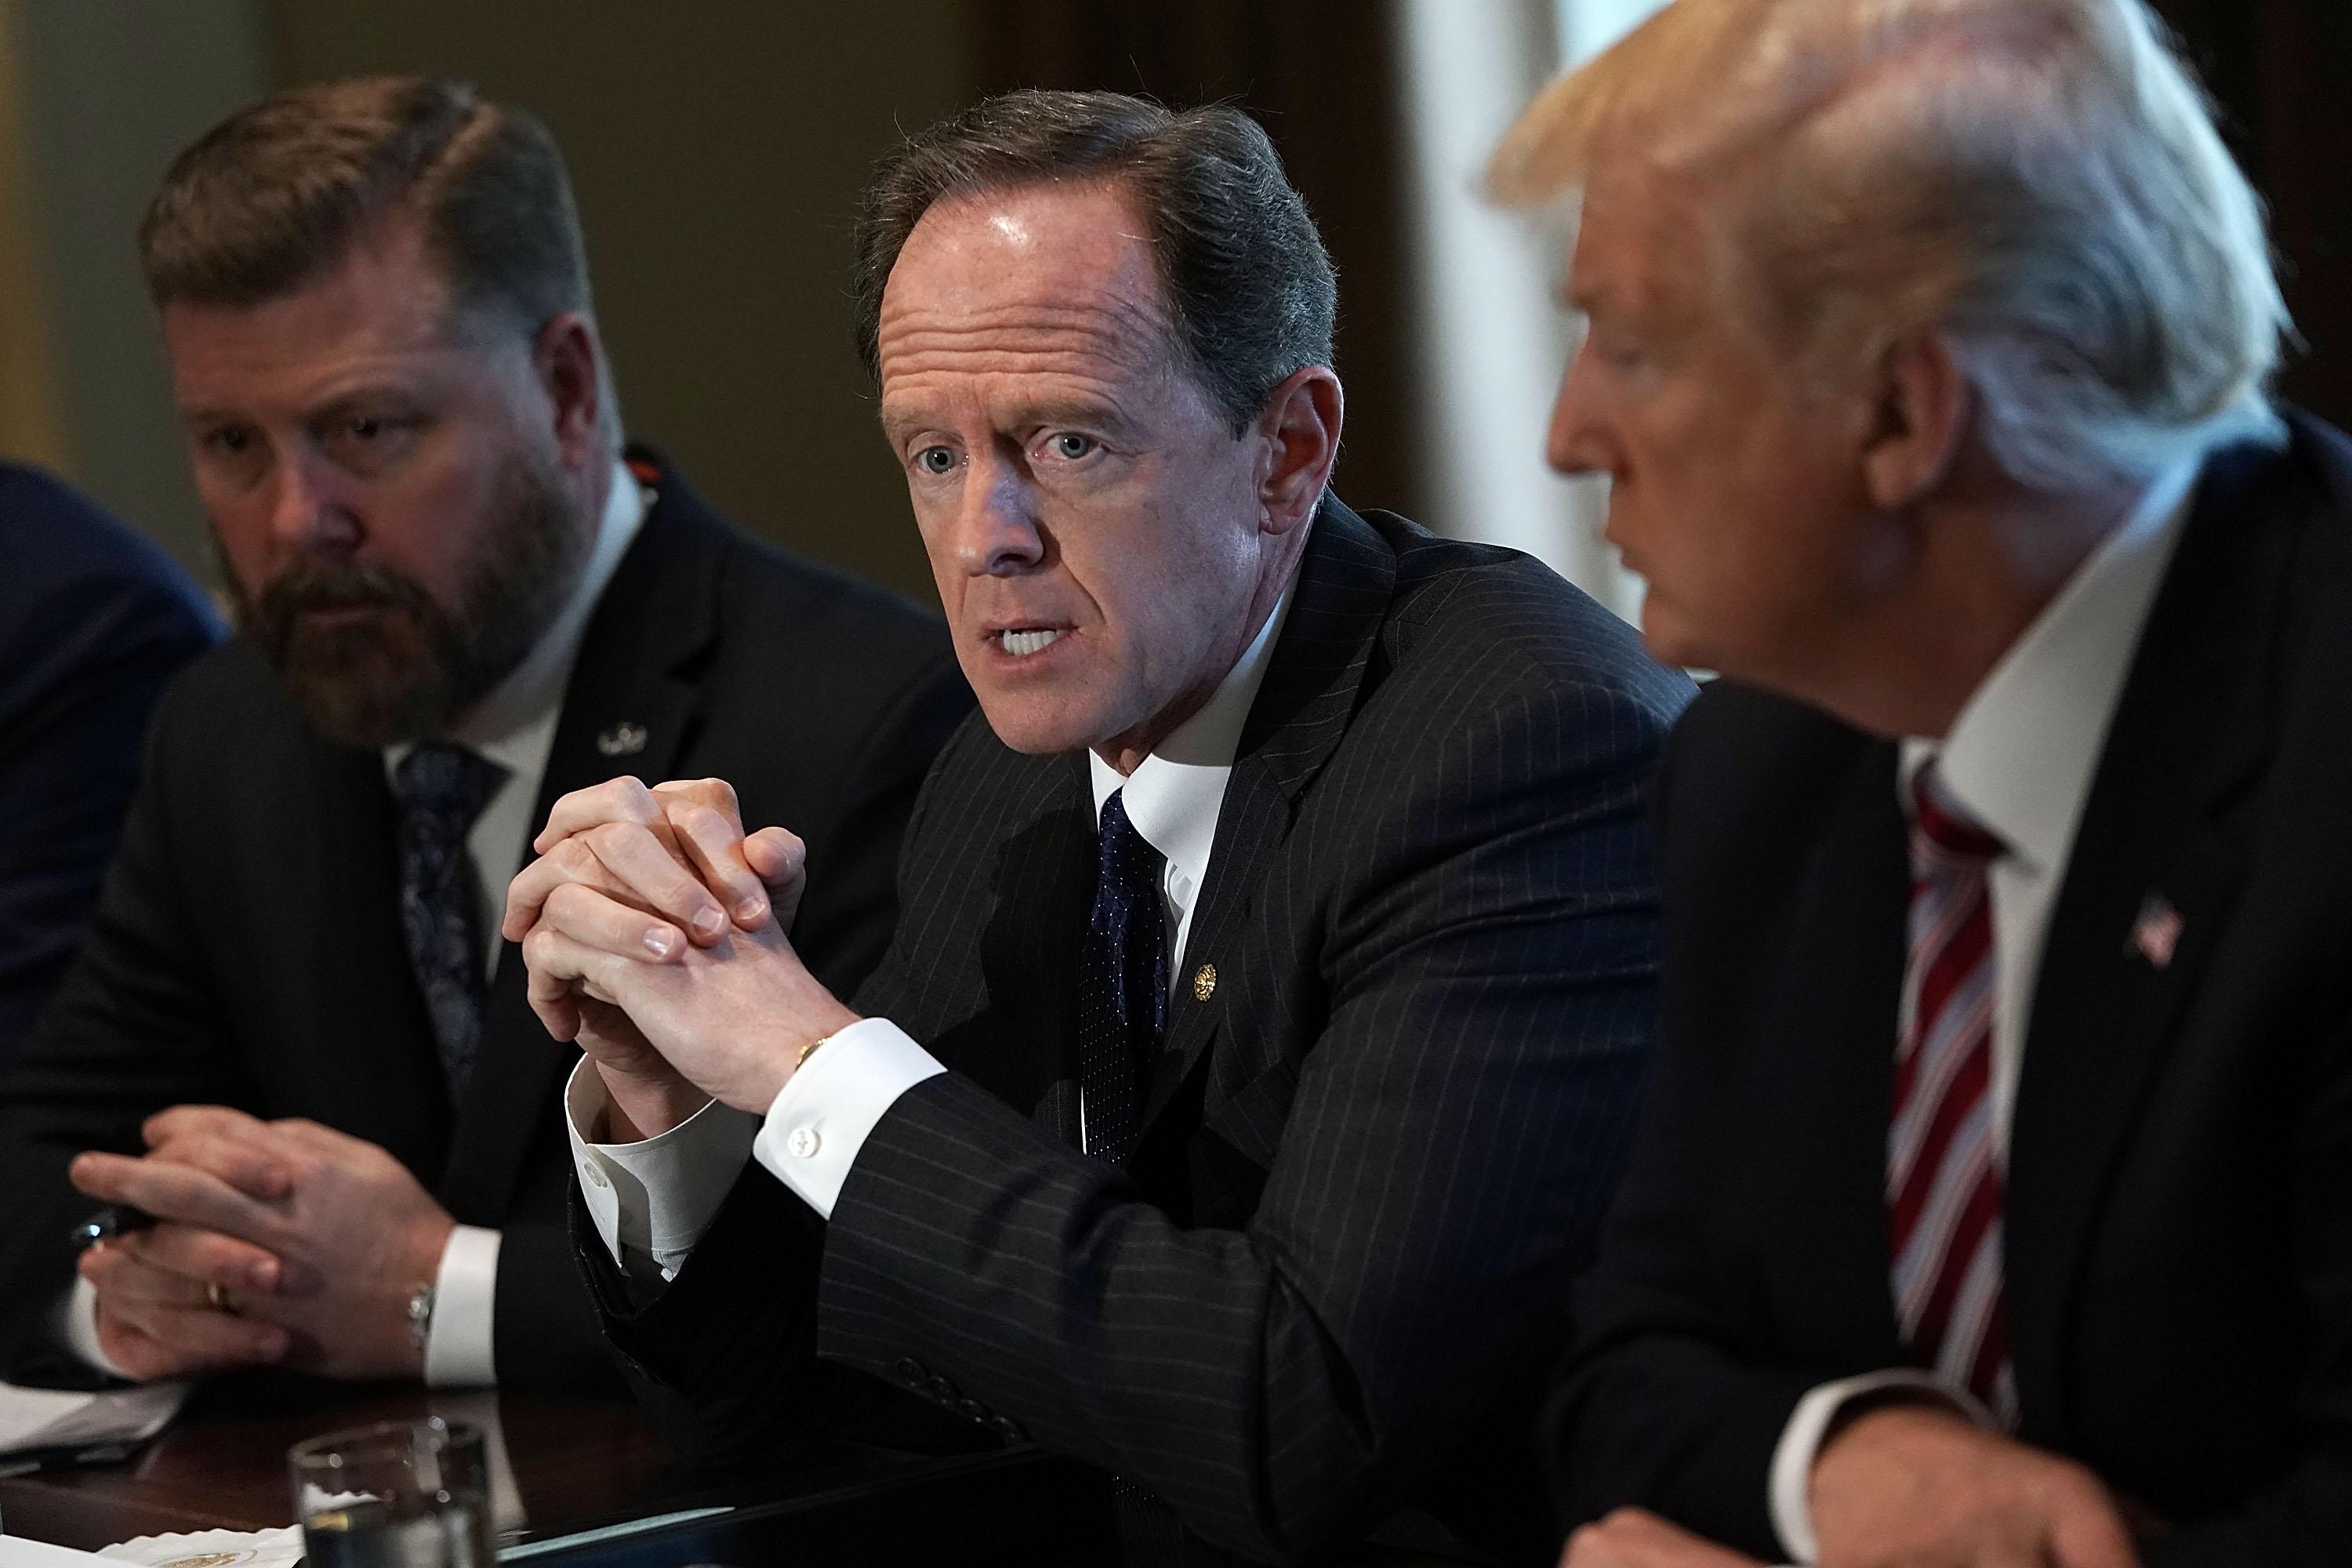 Sen. Pat Toomey (R-PA) during a meeting with congressional members at the White House February 13, 2018 in Washington, DC.